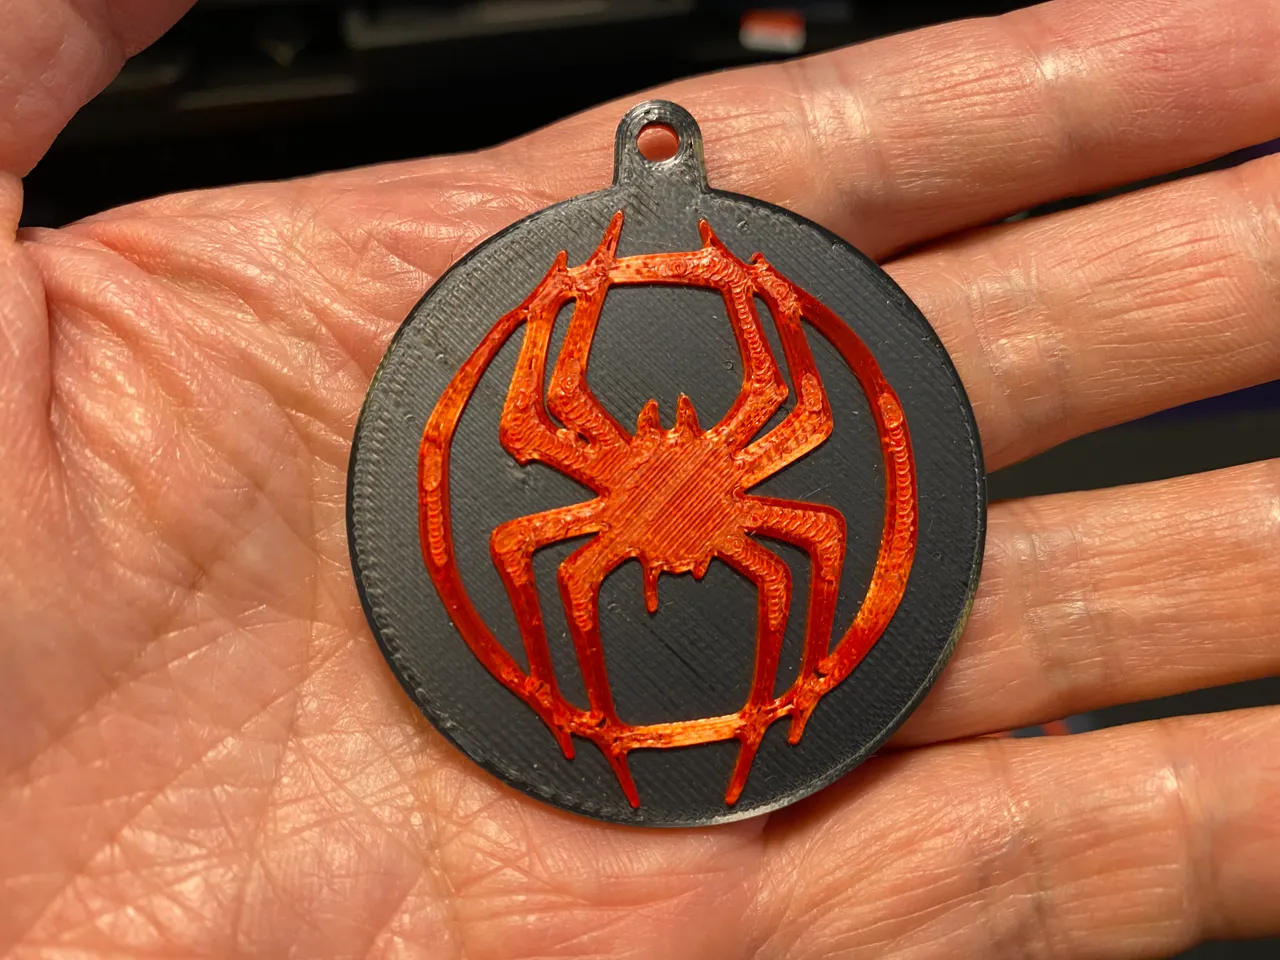 Acrylic Keychain Spider-Man Pattern A Spider-Man: Across the Spiderverse